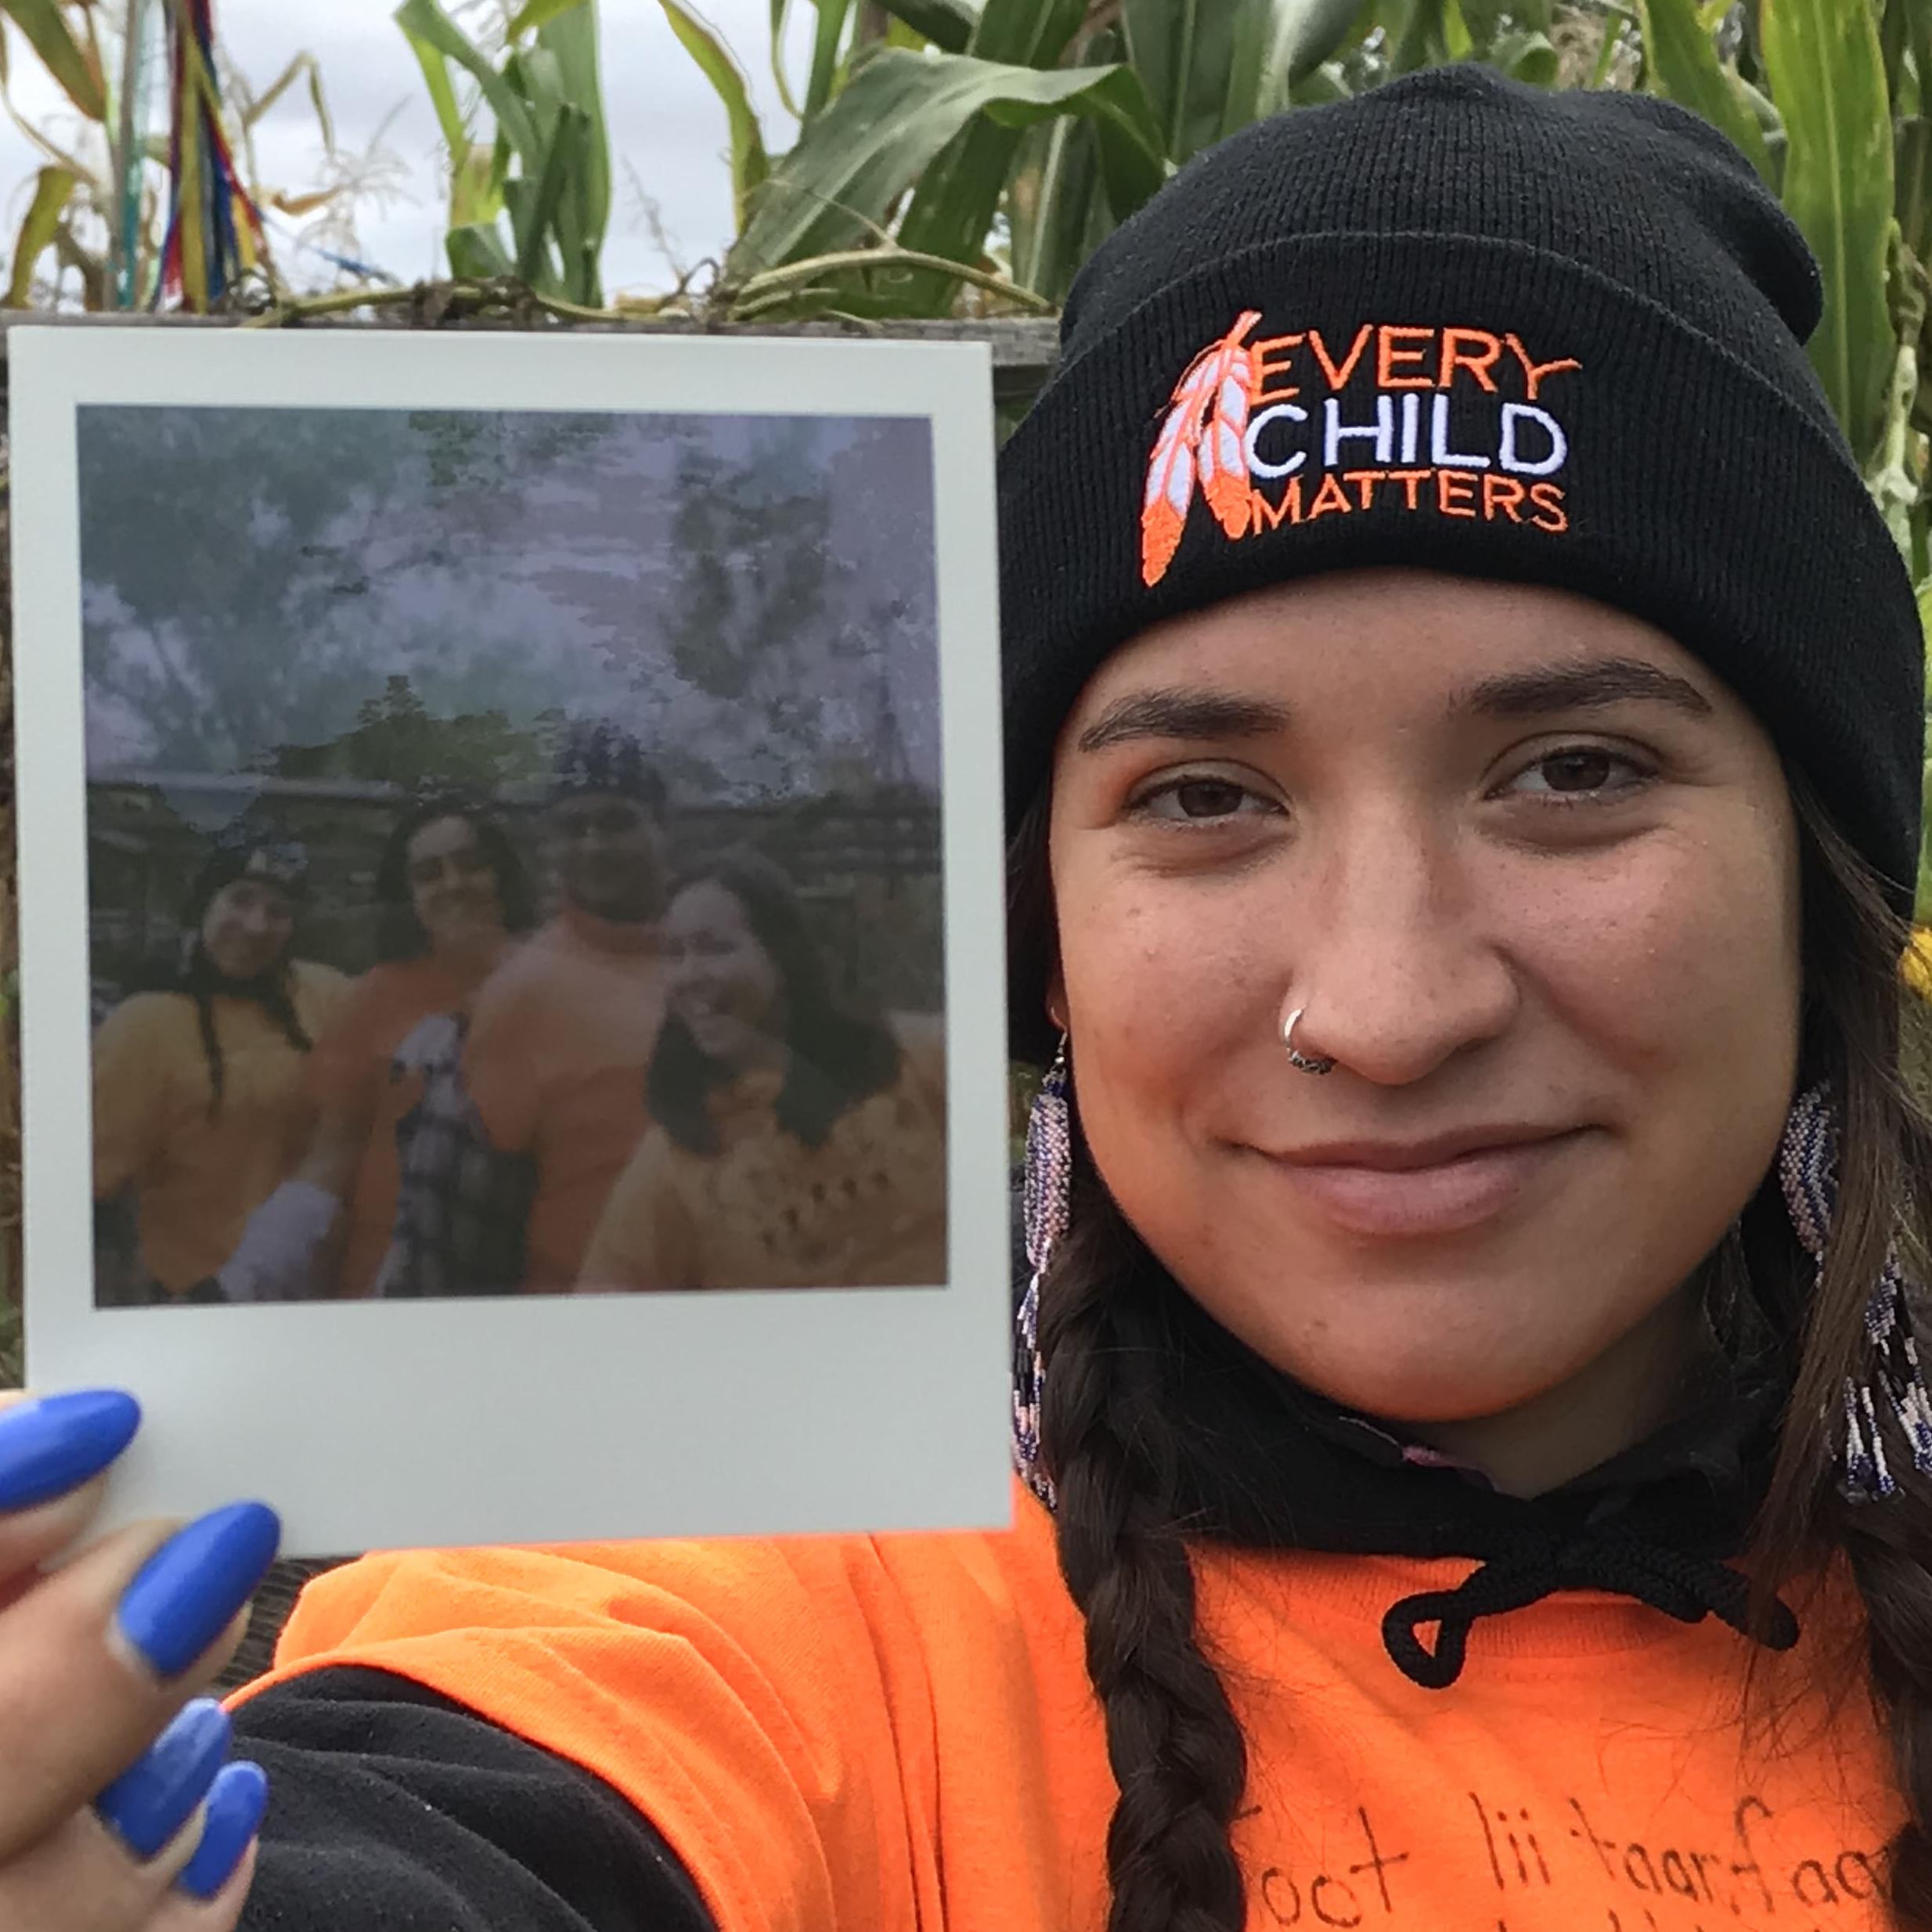 Alexis Bornyk, a young woman with long braided dark hair wearing an "every child matters" hat and orange shirt, holding a polaroid picture from an event at UTSC campus farm